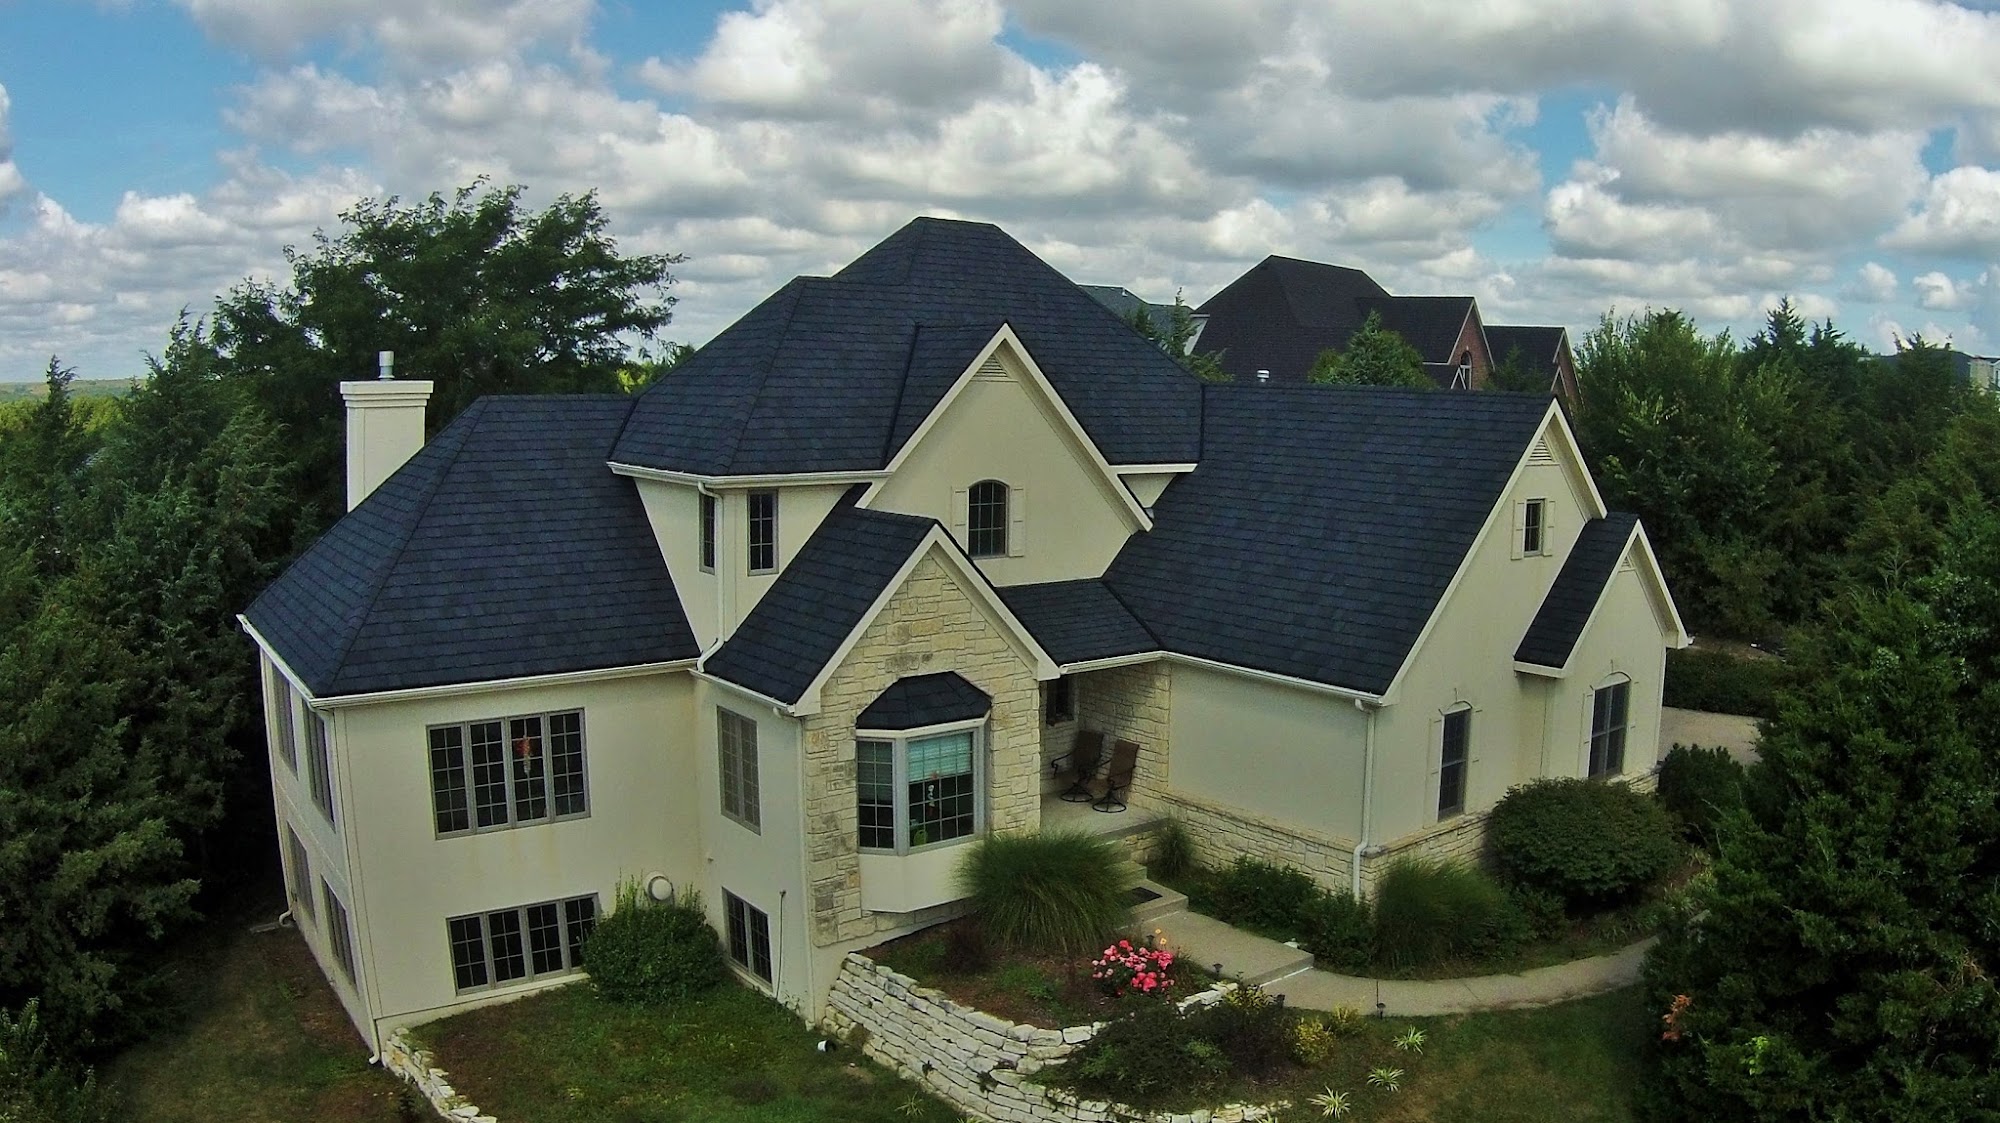 Weddle and Sons Roofing of Olathe